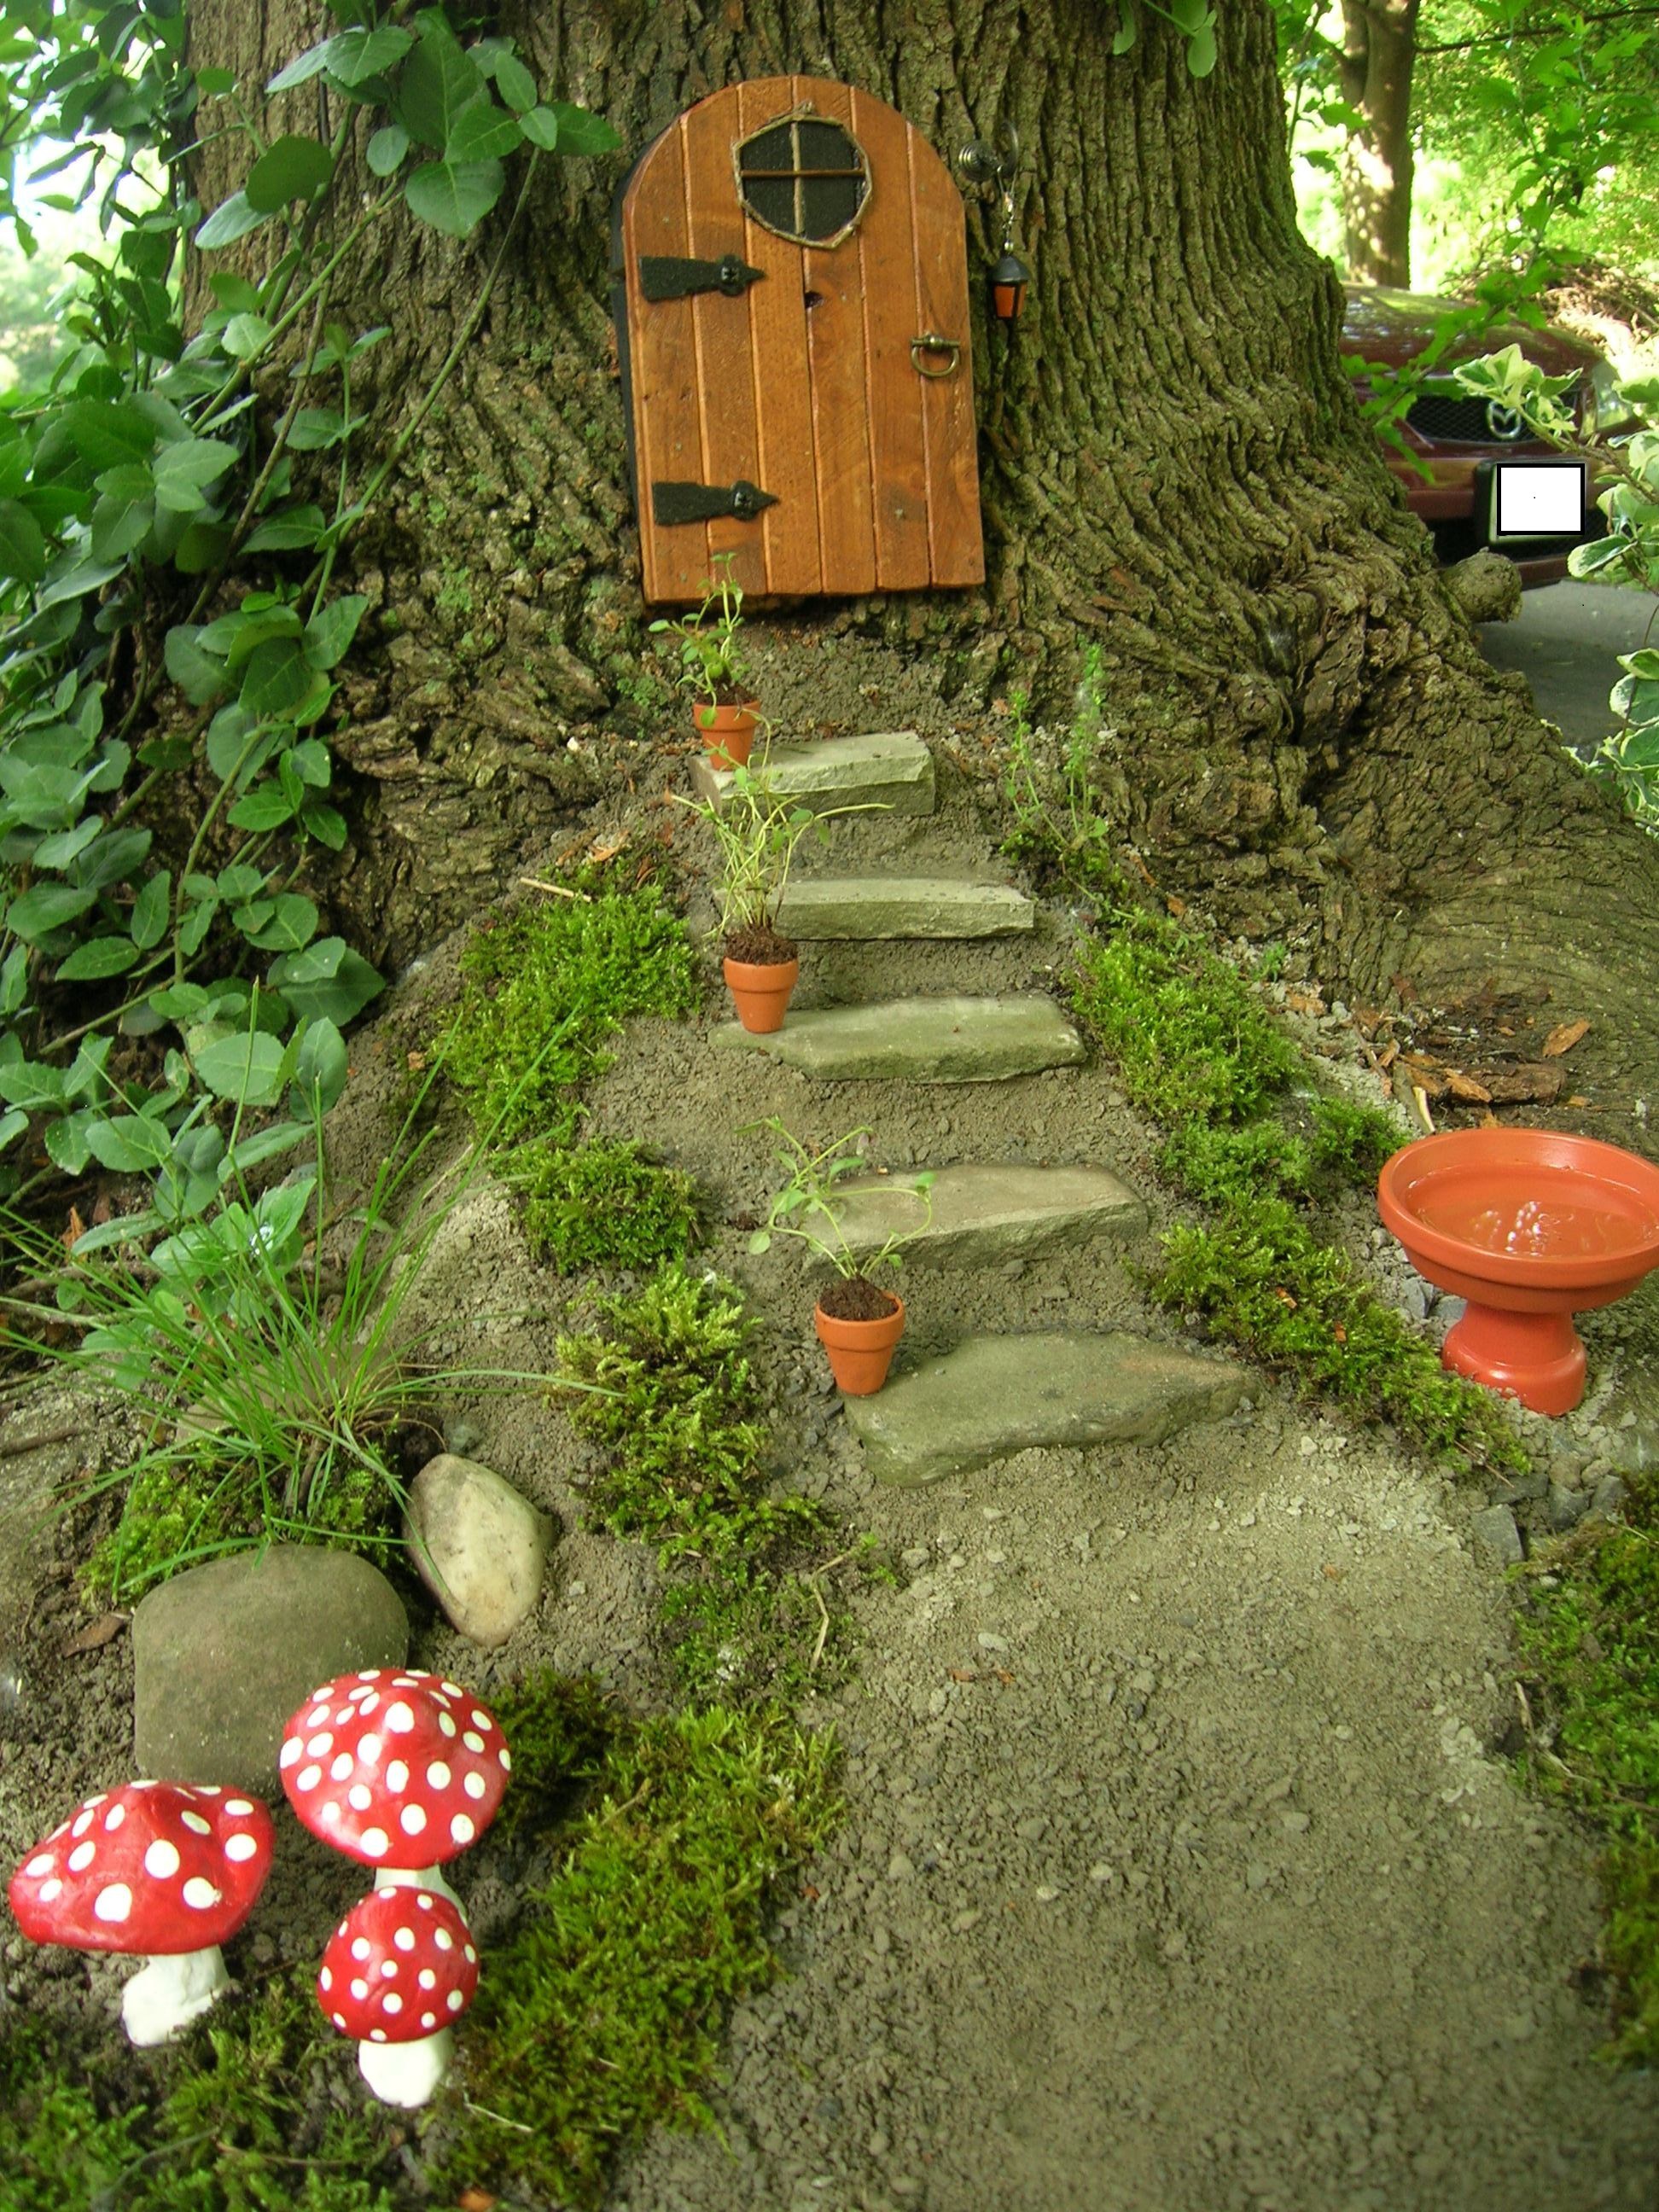 Tree Trunk Ideas That Make Excellent Decor For Your Garden - Page 2 of 3